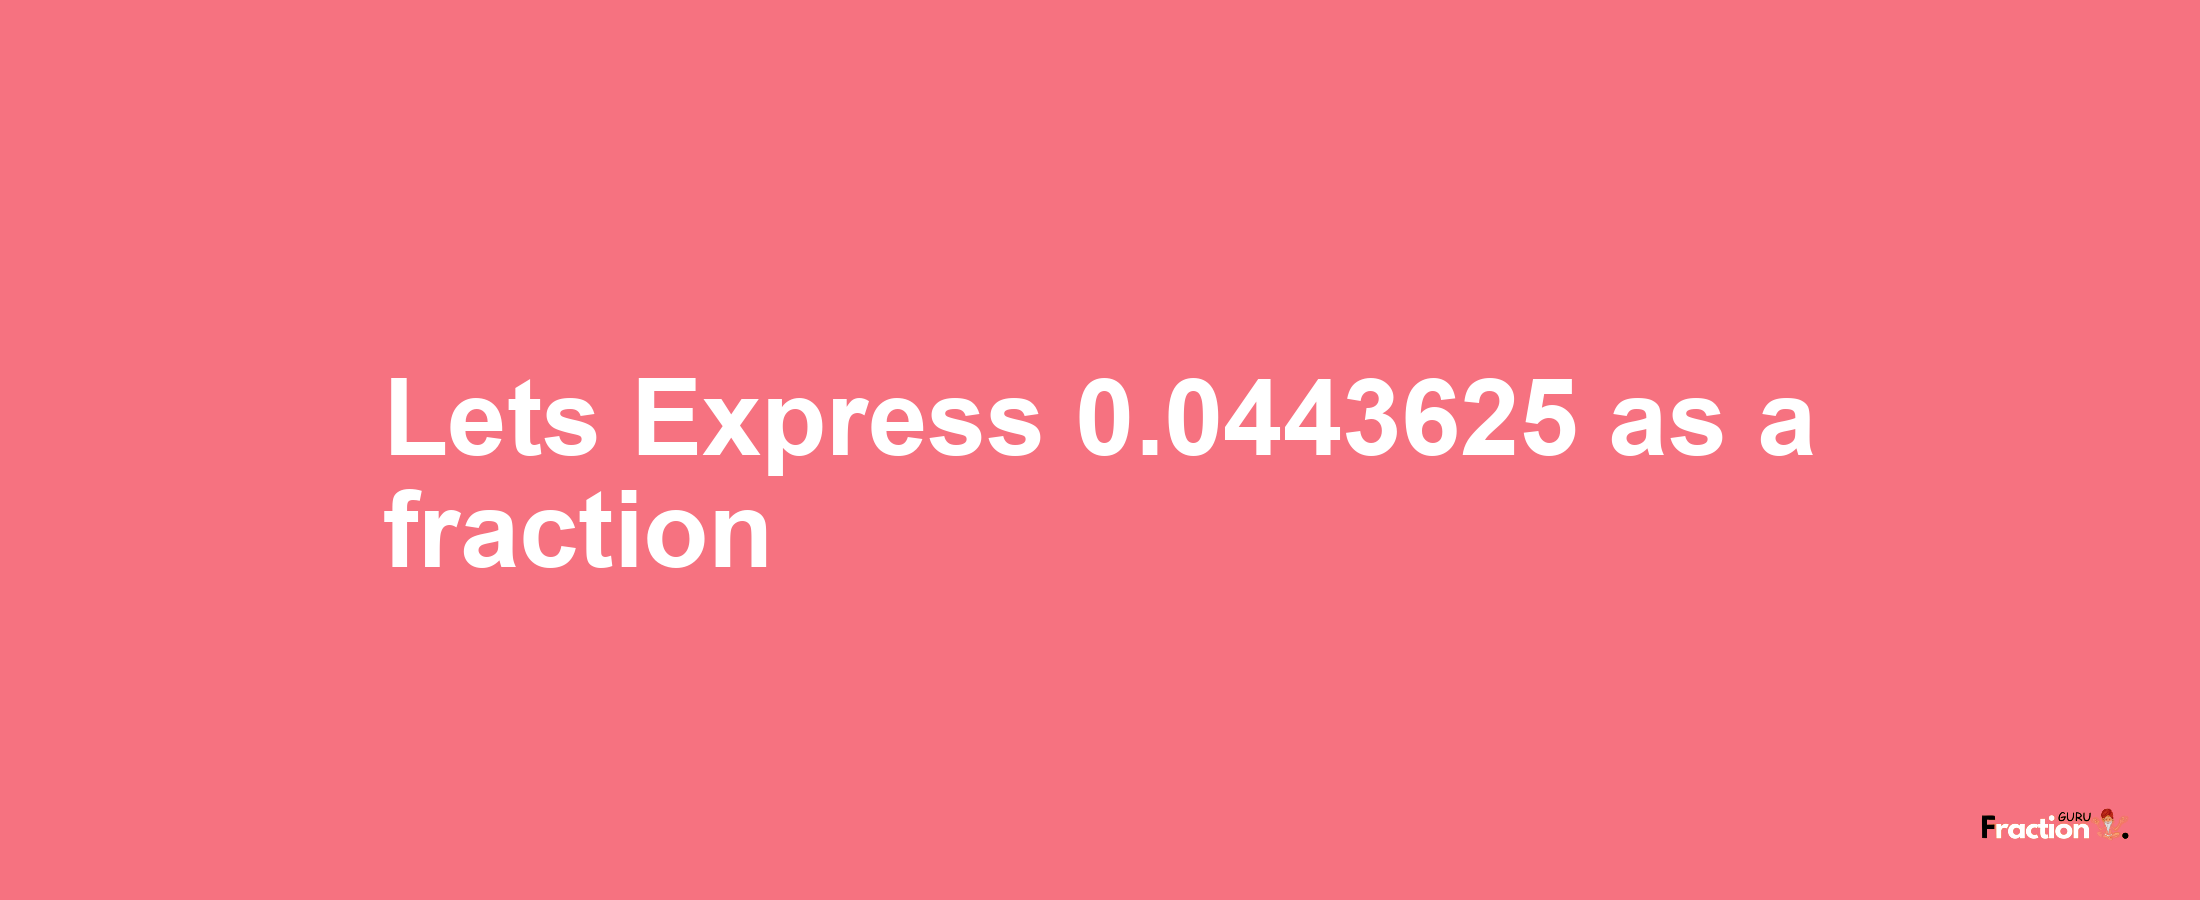 Lets Express 0.0443625 as afraction